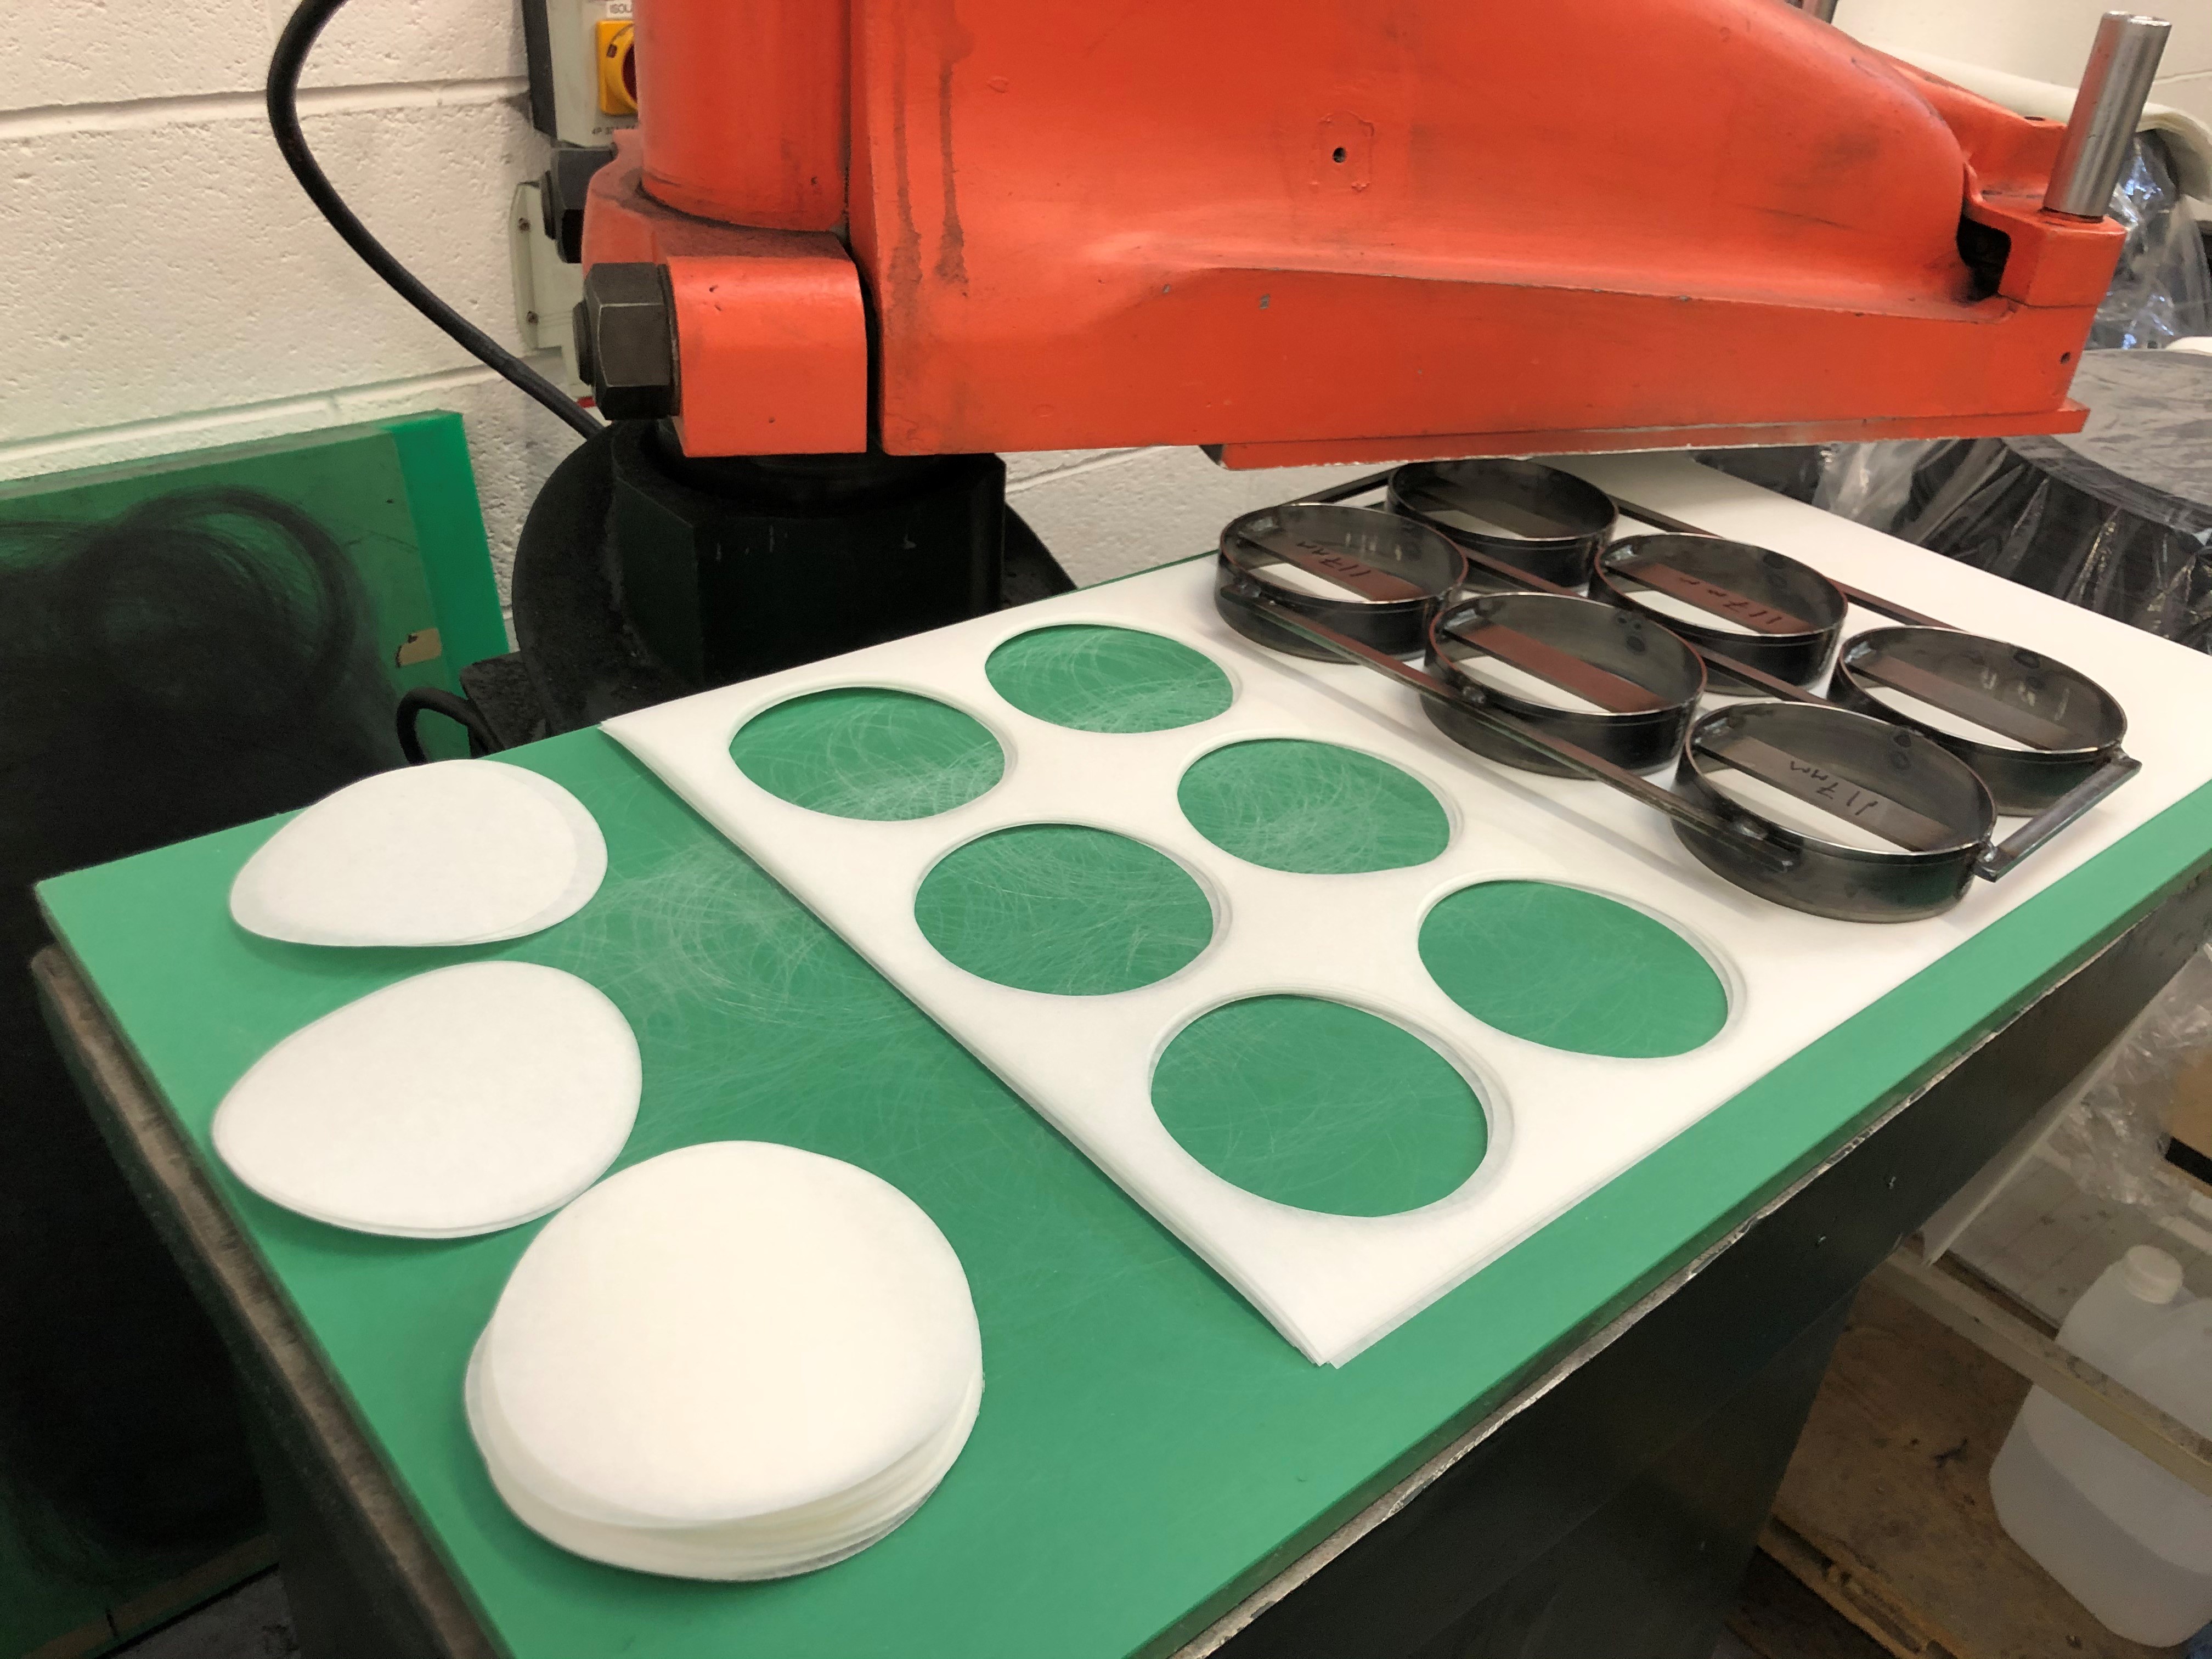 Composites slitting company Bindatex has reconfigured its production to begin die cutting discs to make filters.